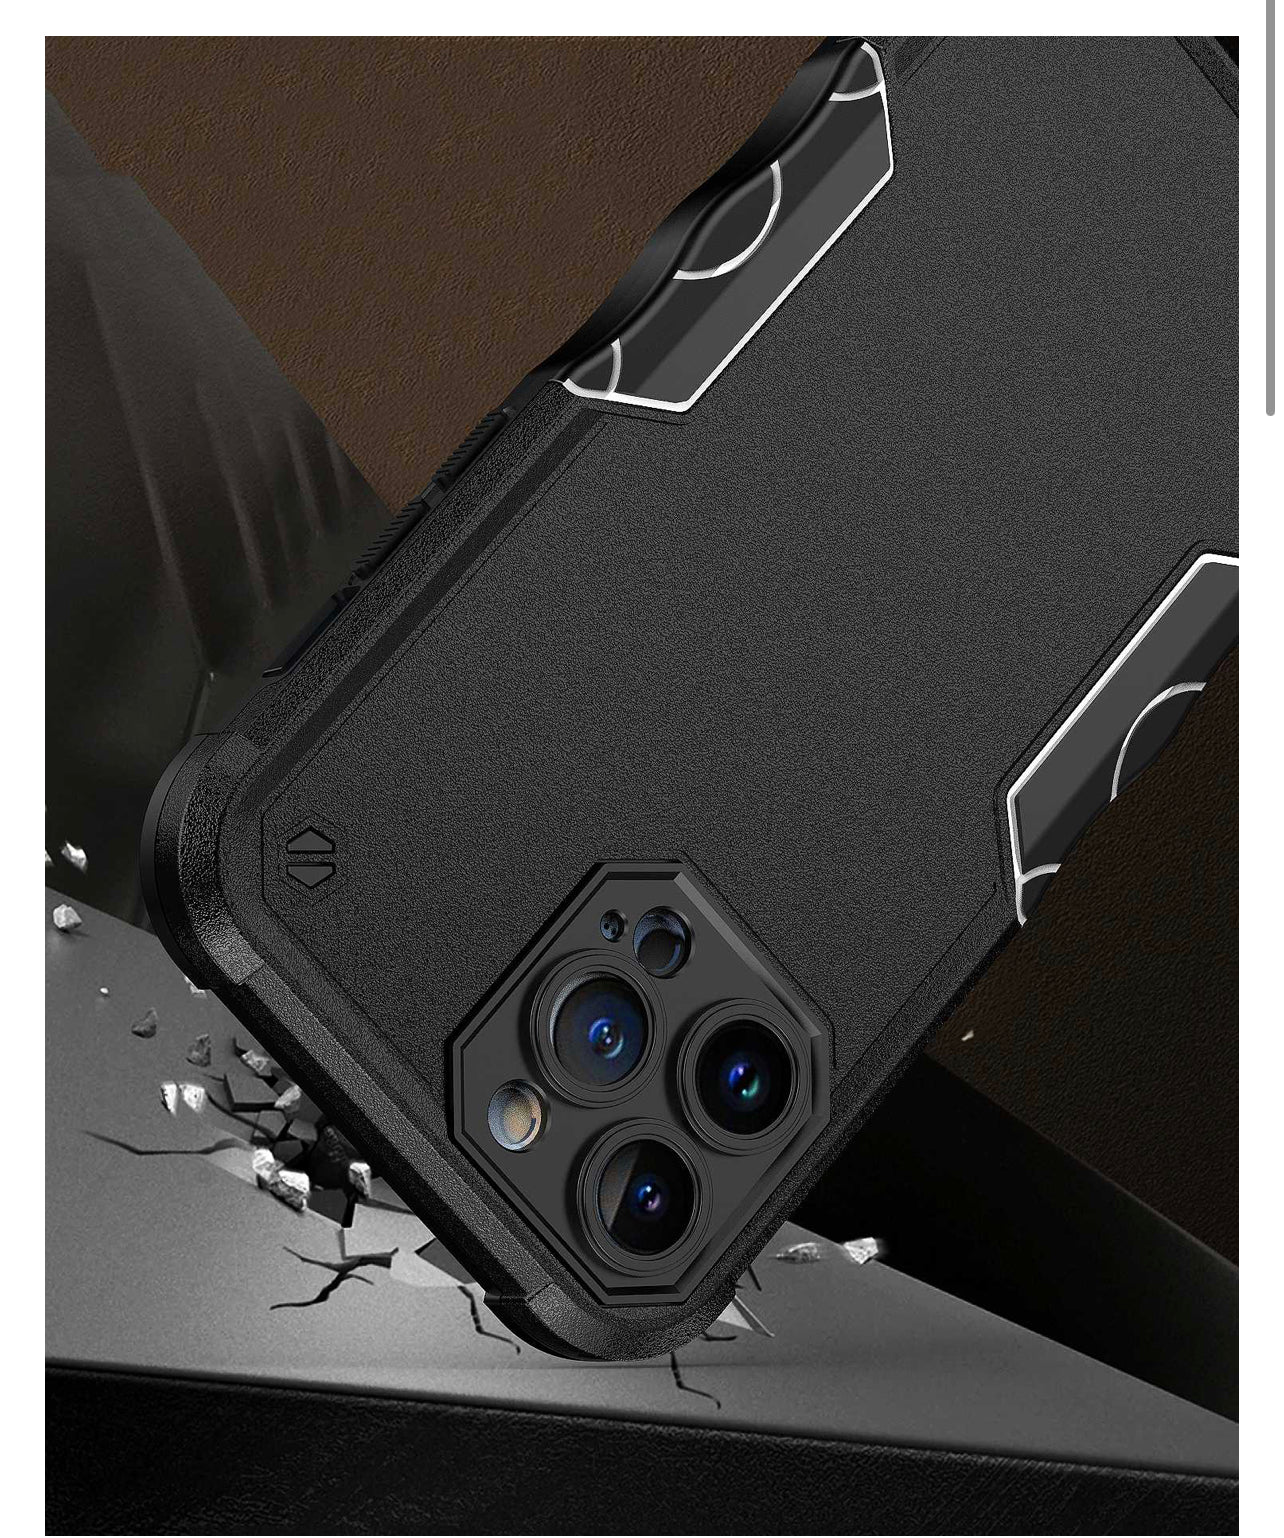 iPhone 14 6.1" Exquisite Tough Shockproof Hybrid Case Cover - Black